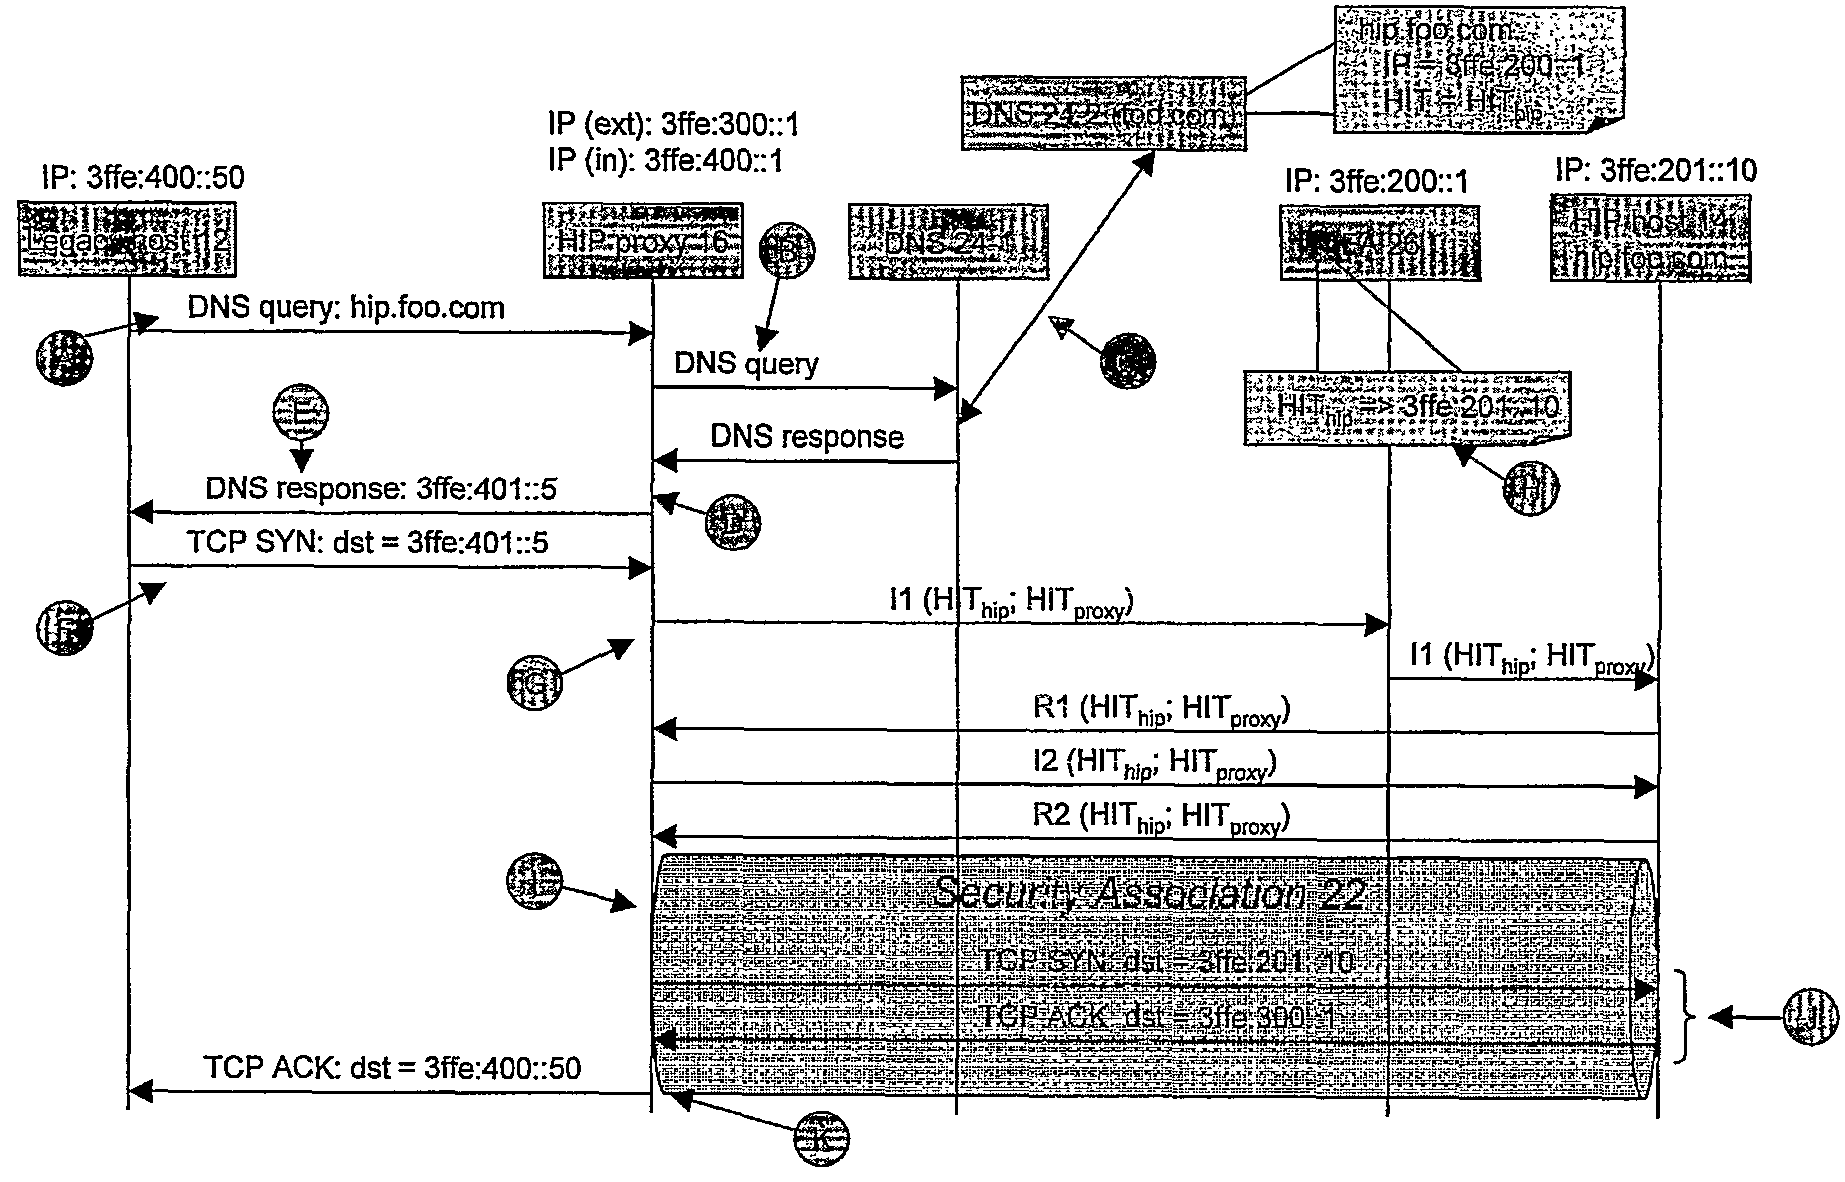 Addressing method and method and apparatus for establishing host identity protocol (HIP) connections between legacy and HIP nodes